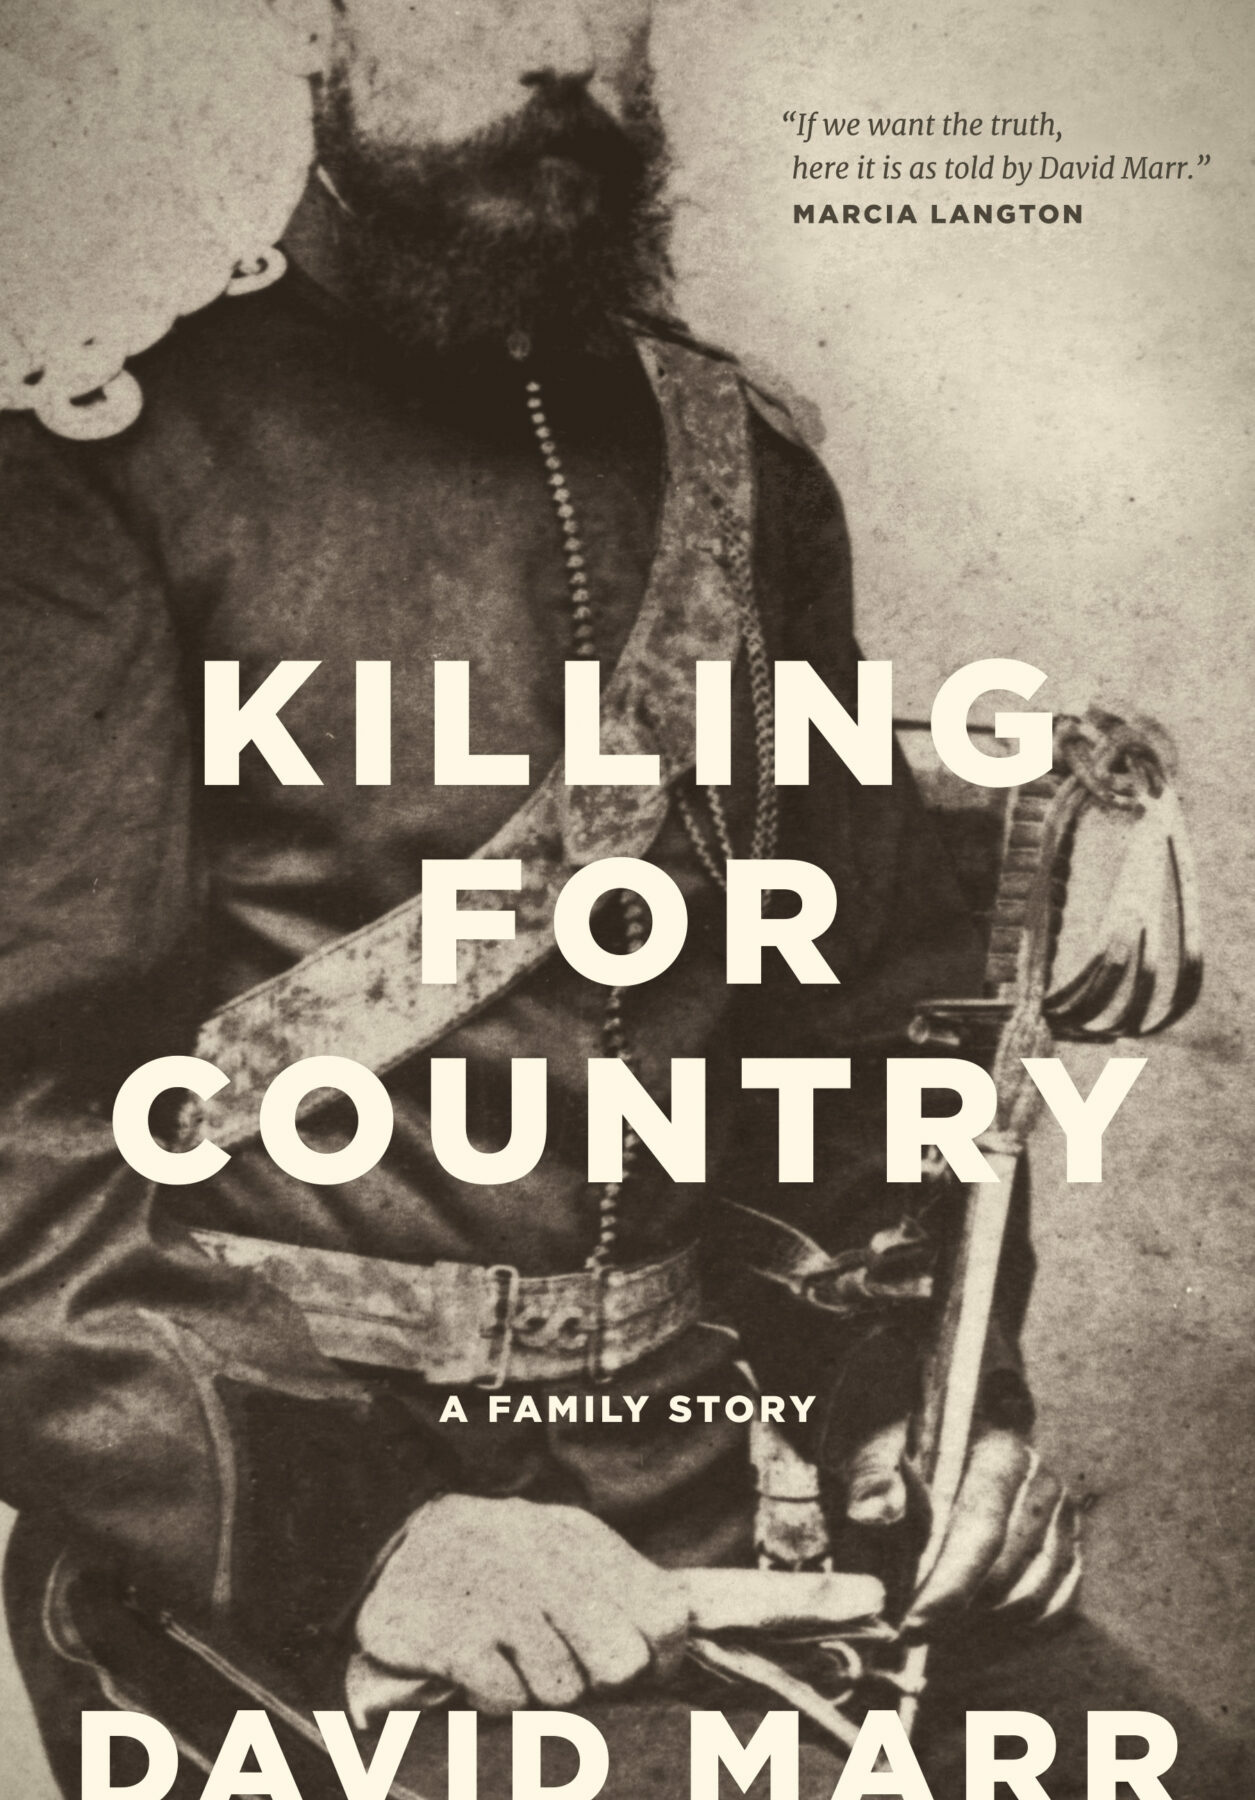 A book cover featuring an old photograph of a bearded man in military uniform, with the title text overlaid in white block letters